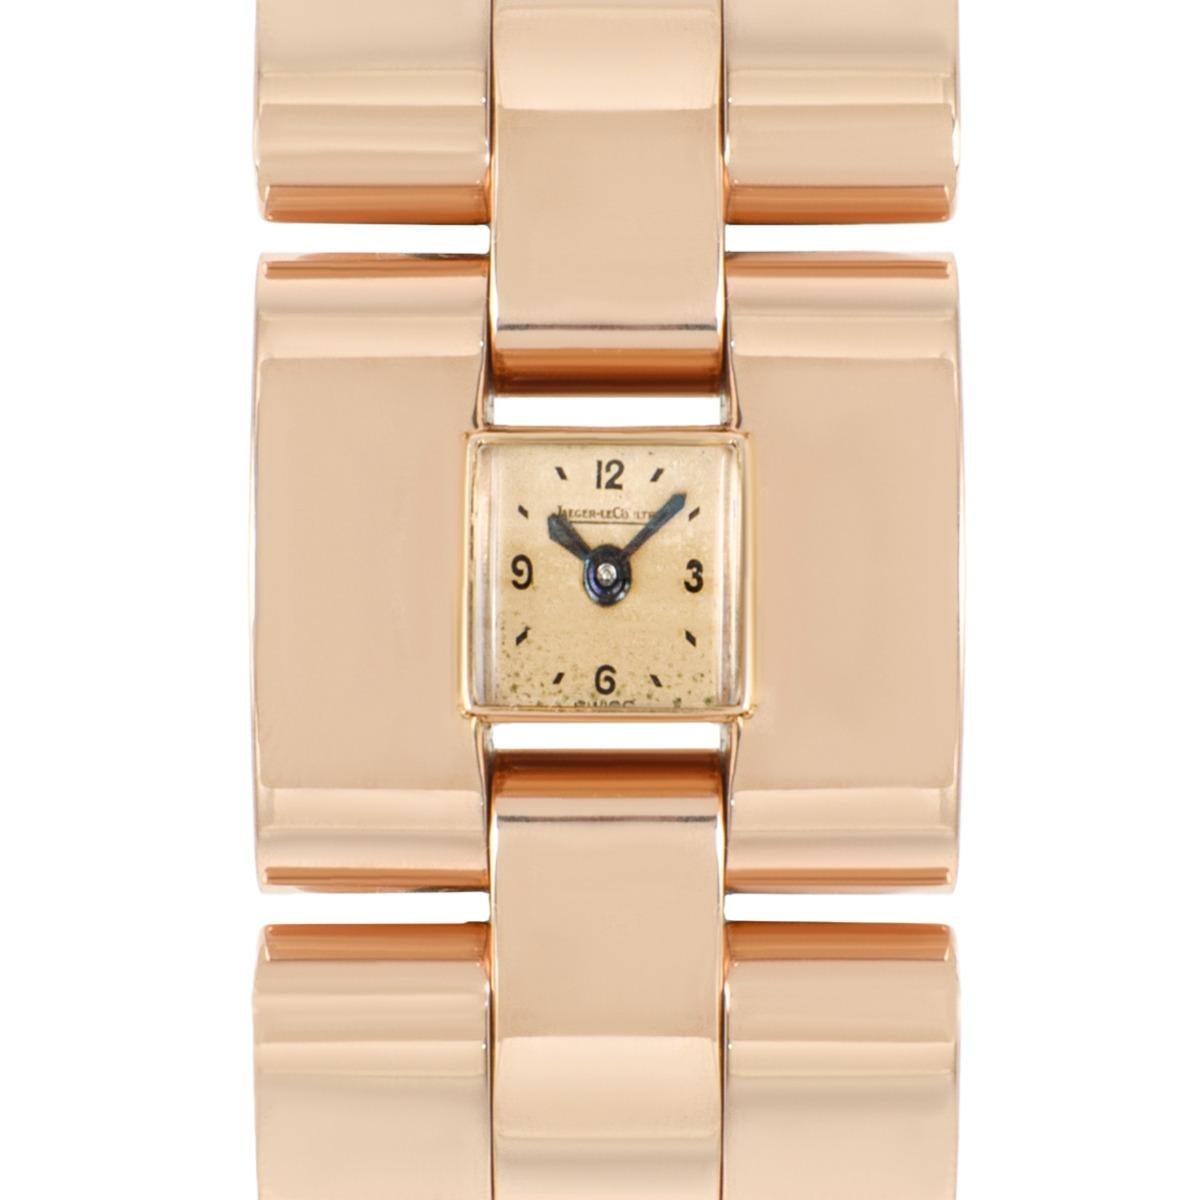 A vintage women's dress wristwatch, made from 18k rose gold, with a manual back winding movement.

A gorgeous 18k rose gold chunky bracelet is set with a little square champagne dial and secured with a concealed jewellery style clasp. The dial is